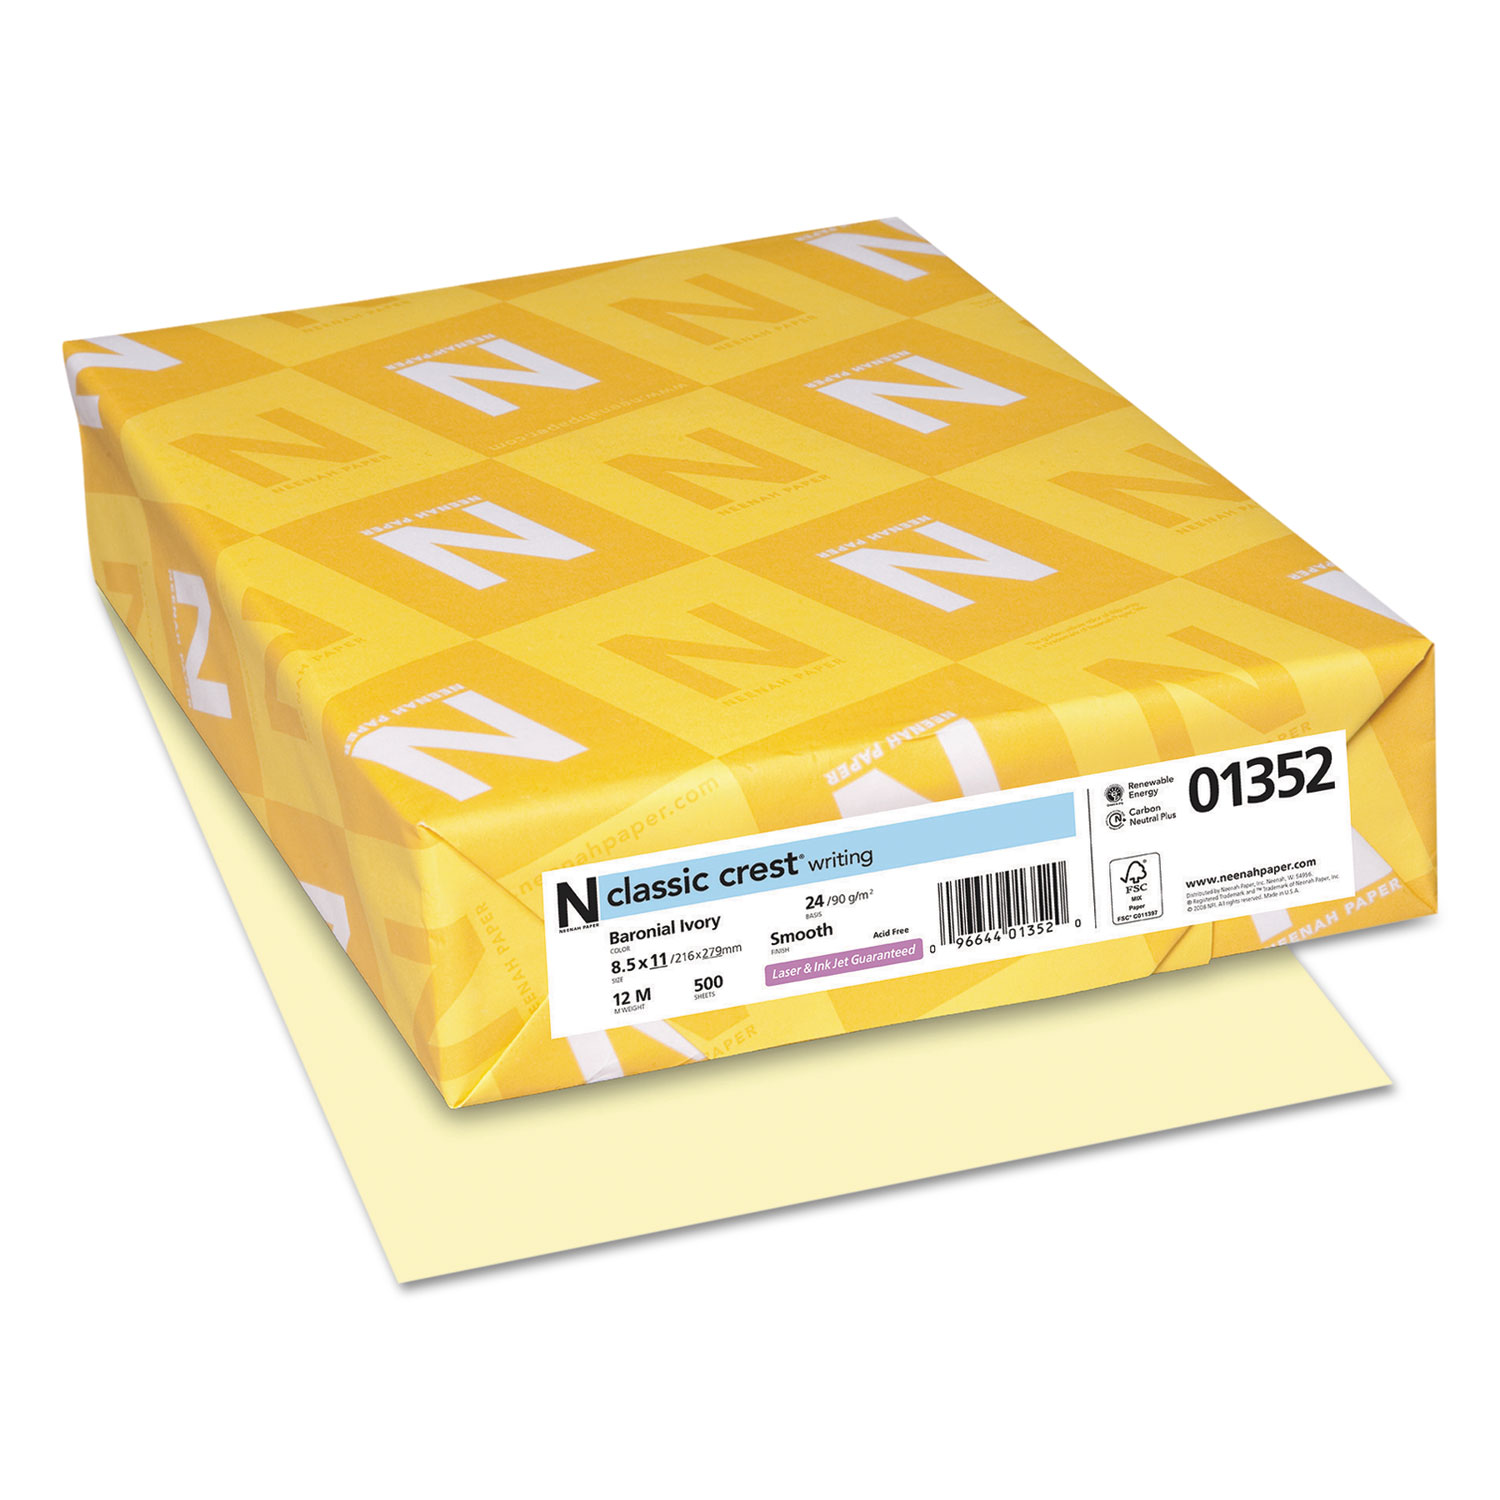  Neenah Paper 01352 CLASSIC CREST Stationery, 24 lb, 8.5 x 11, Baronial Ivory, 500/Ream (NEE01352) 